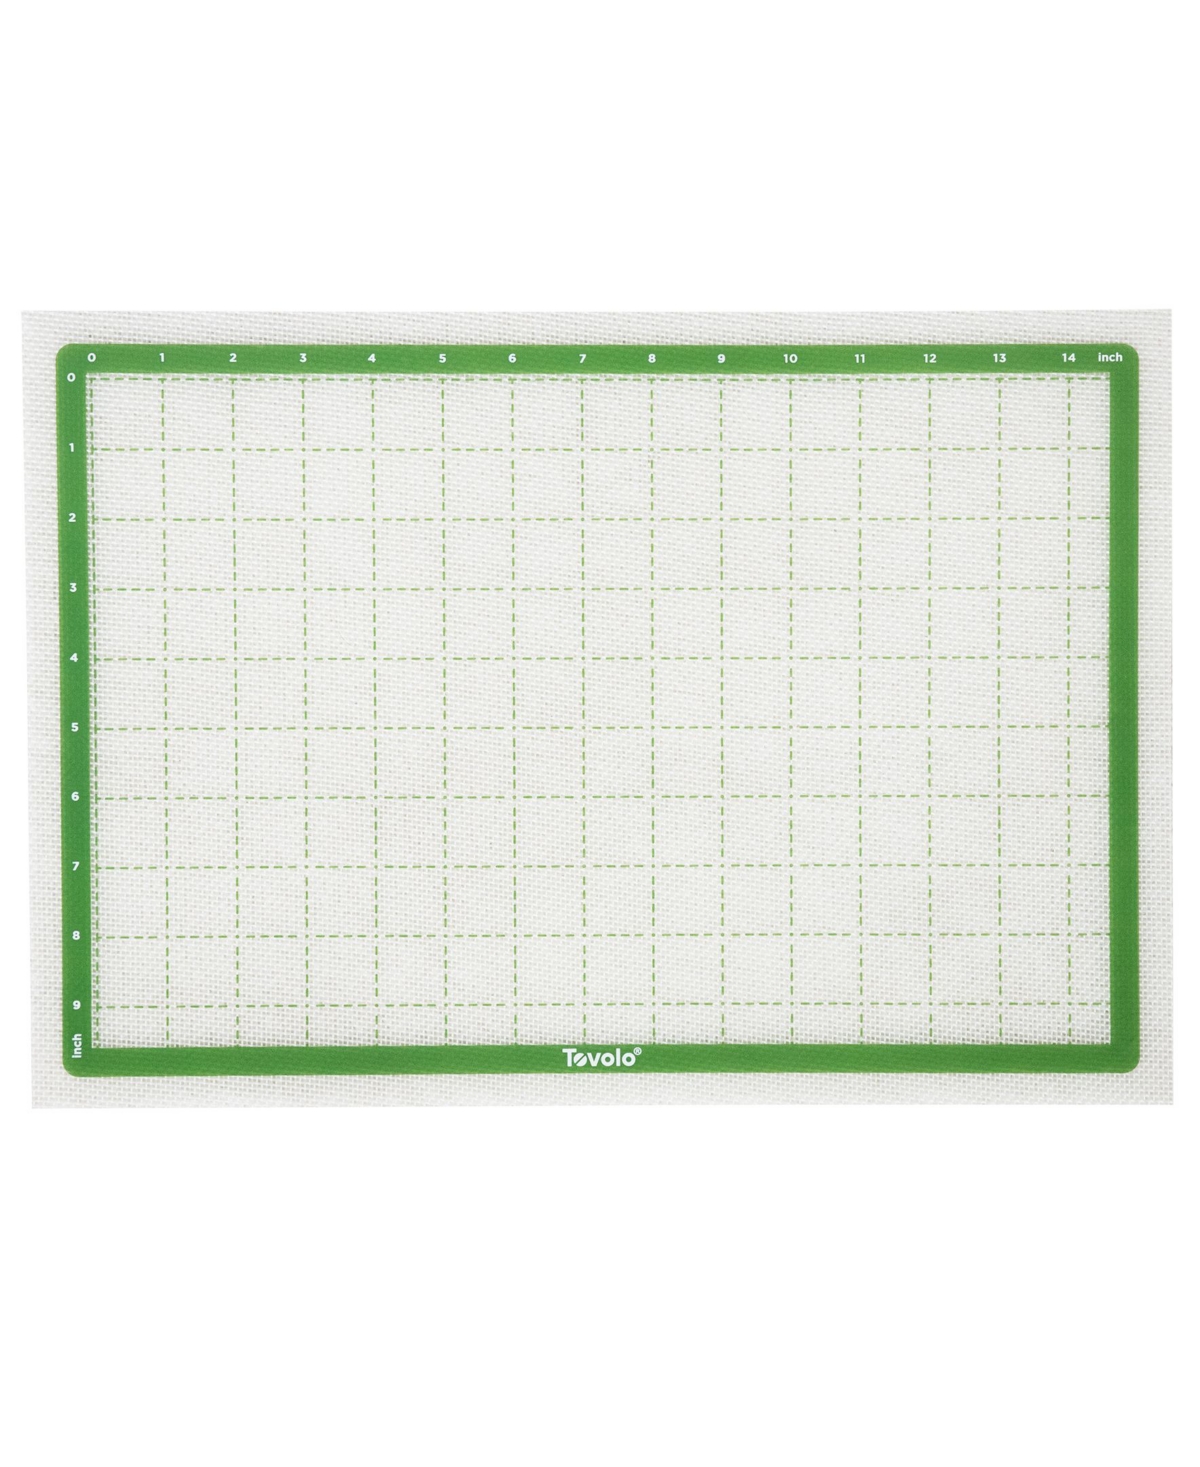 Tovolo Prograde Silicone Sheet Pan Mat With Grid In Pesto